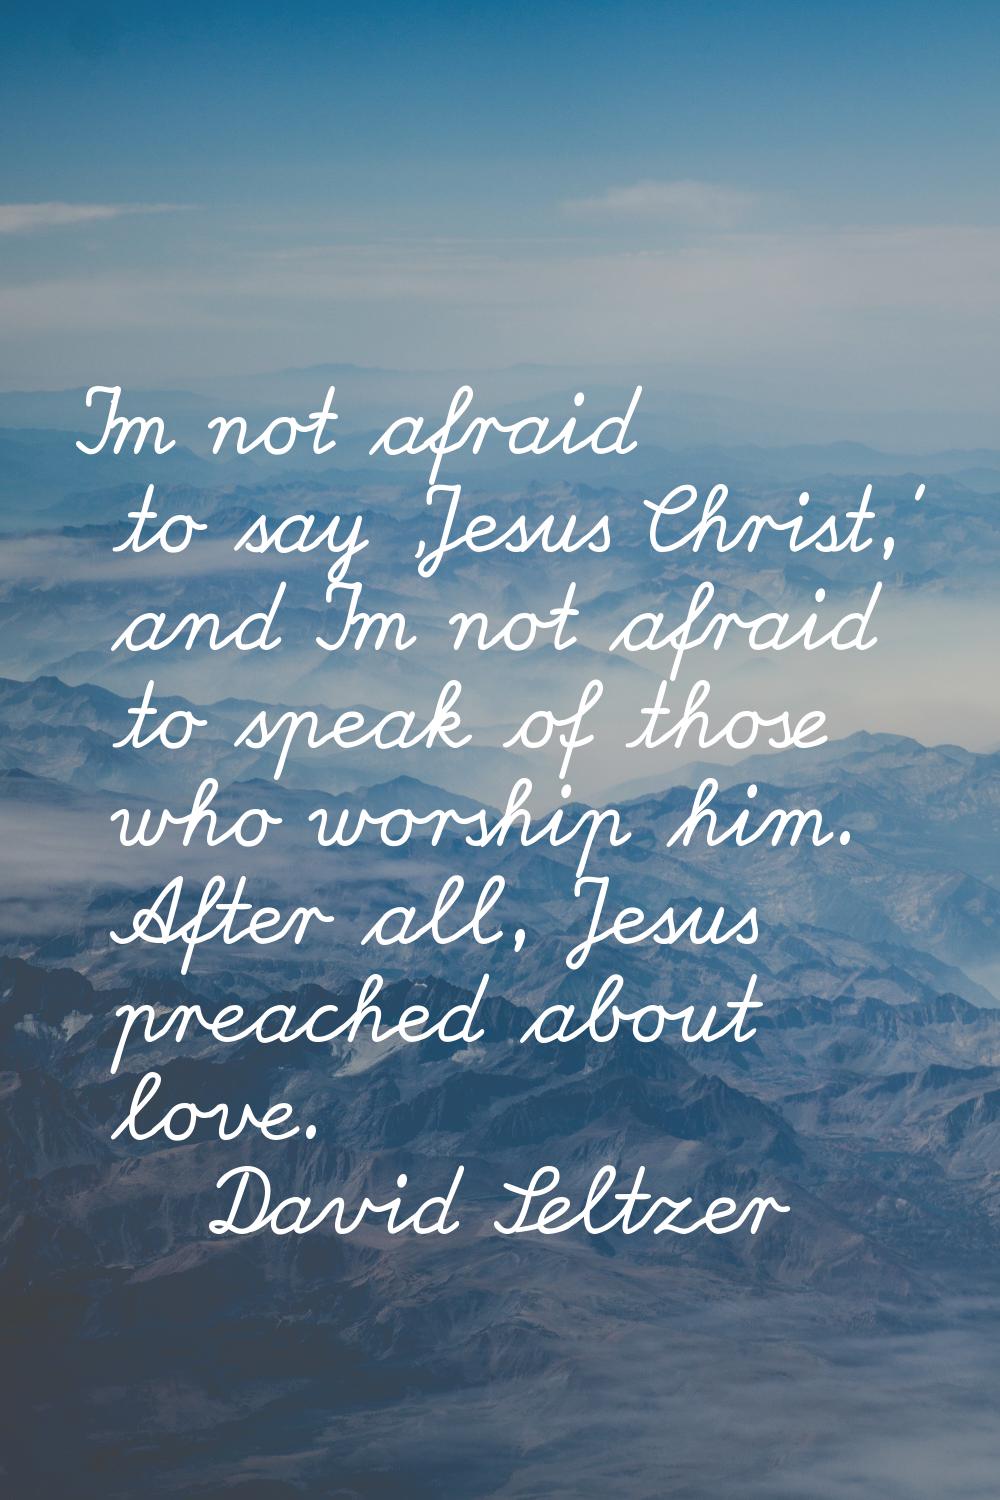 I'm not afraid to say 'Jesus Christ,' and I'm not afraid to speak of those who worship him. After a